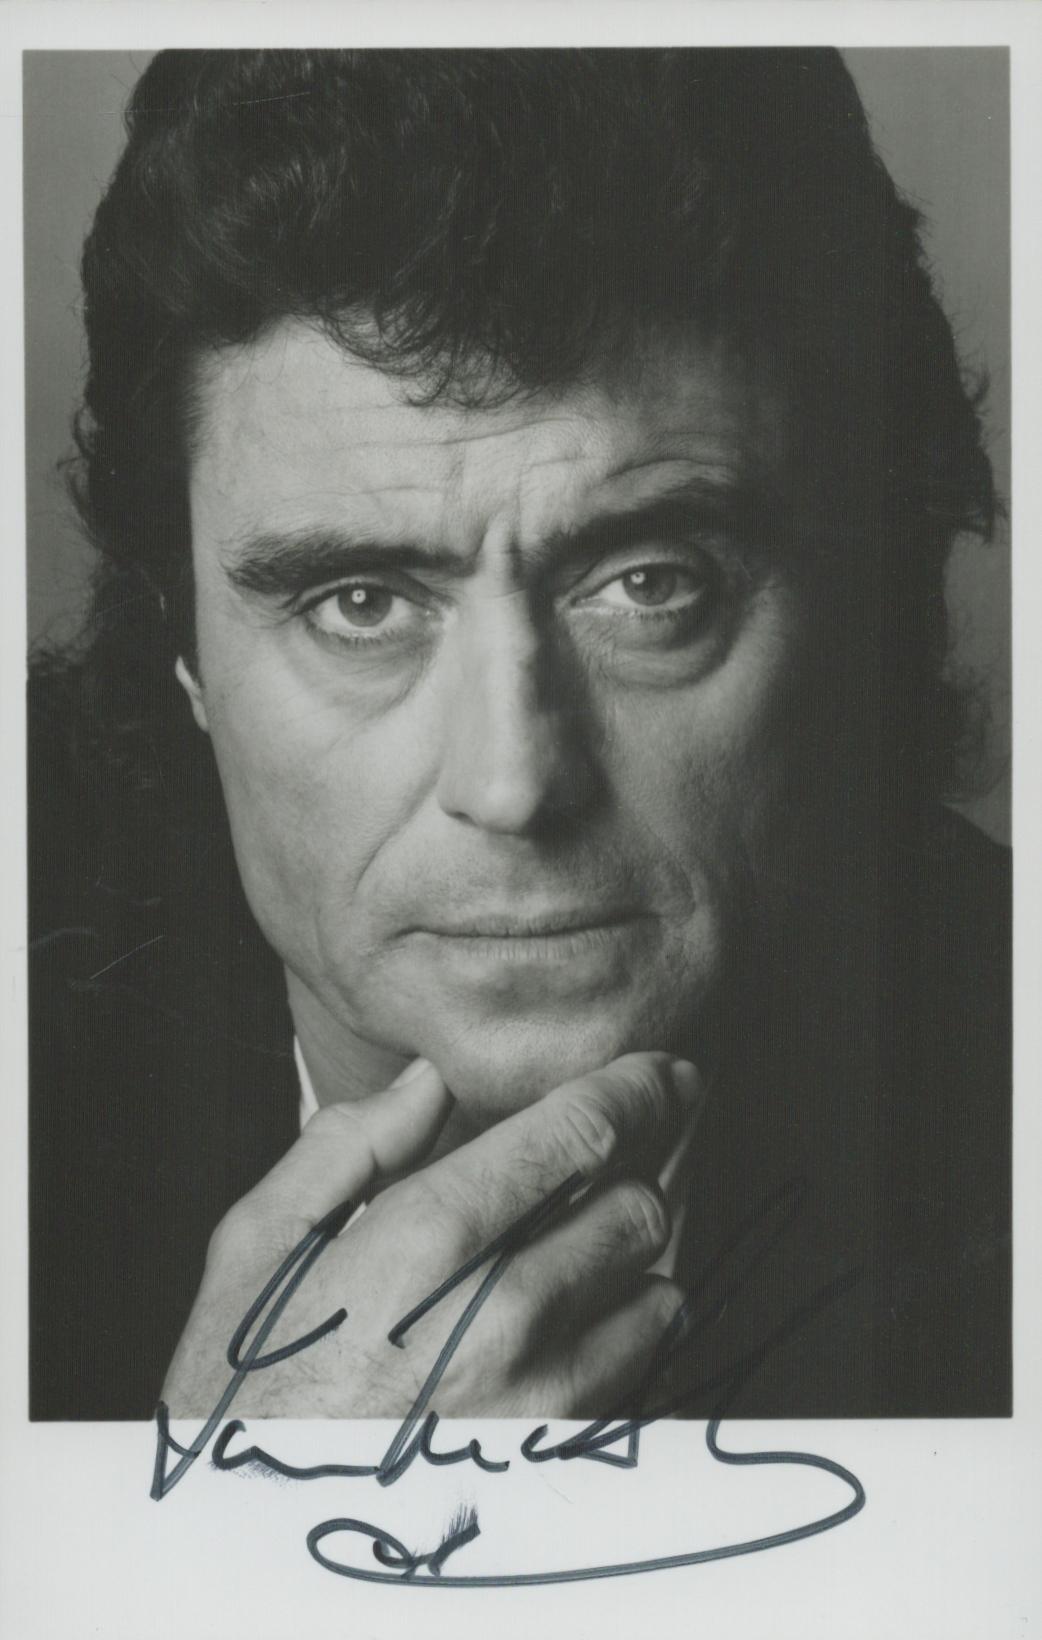 Ian McShane signed 6x4 inch black and white photo. Good Condition. All autographs come with a